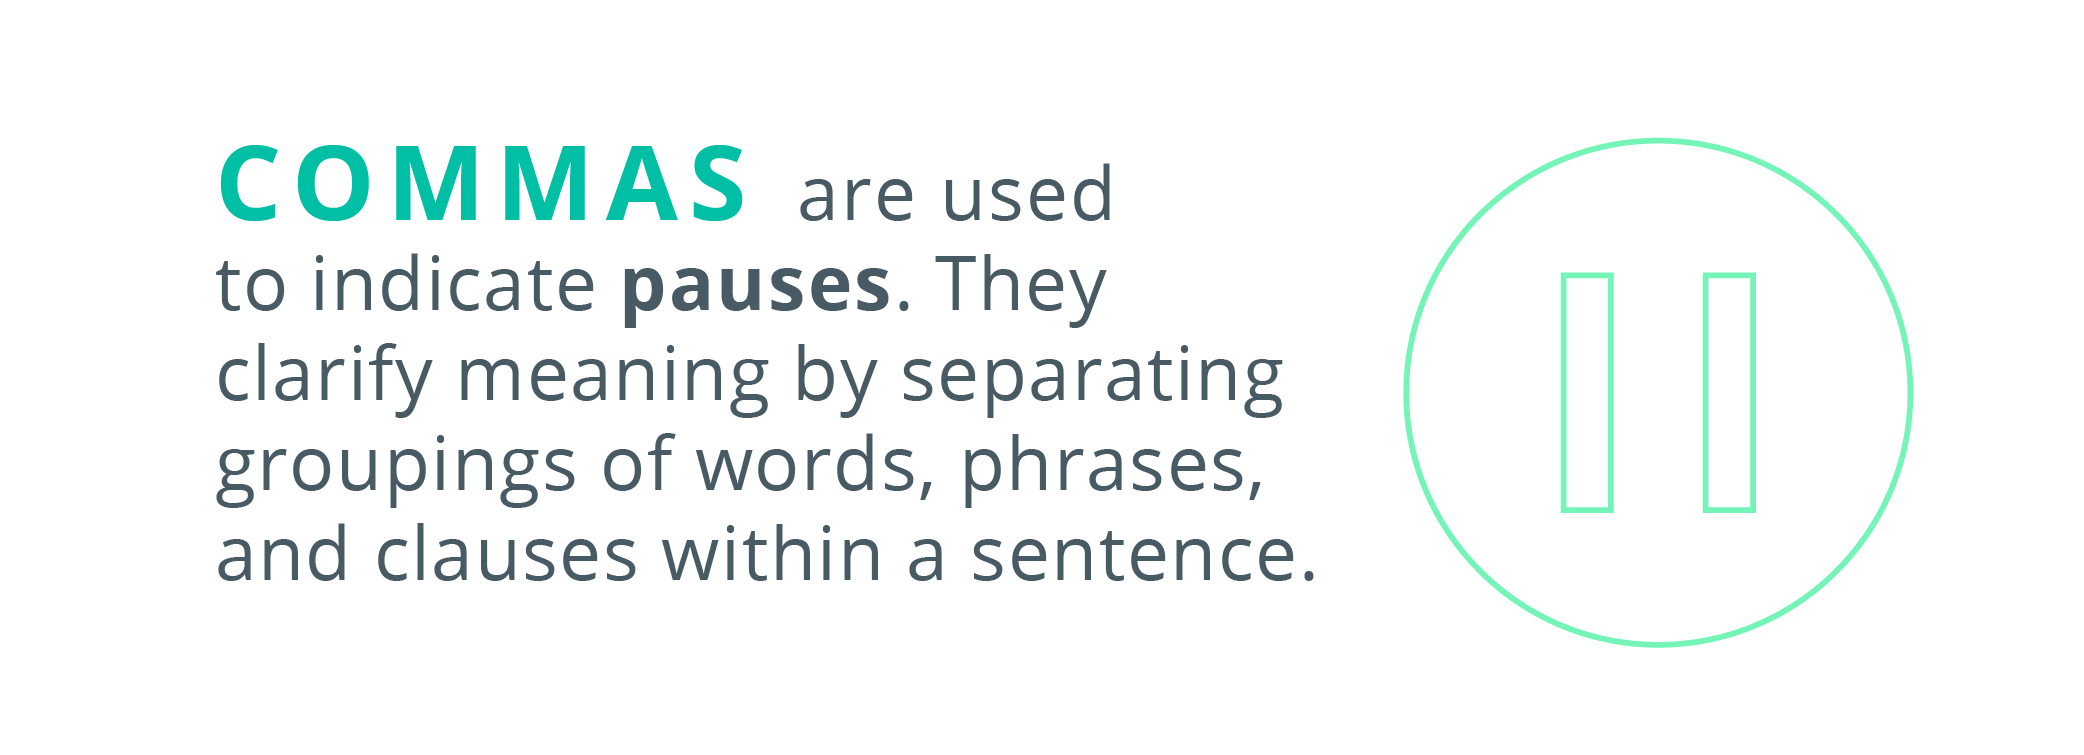 Commas are used to indicate pauses.